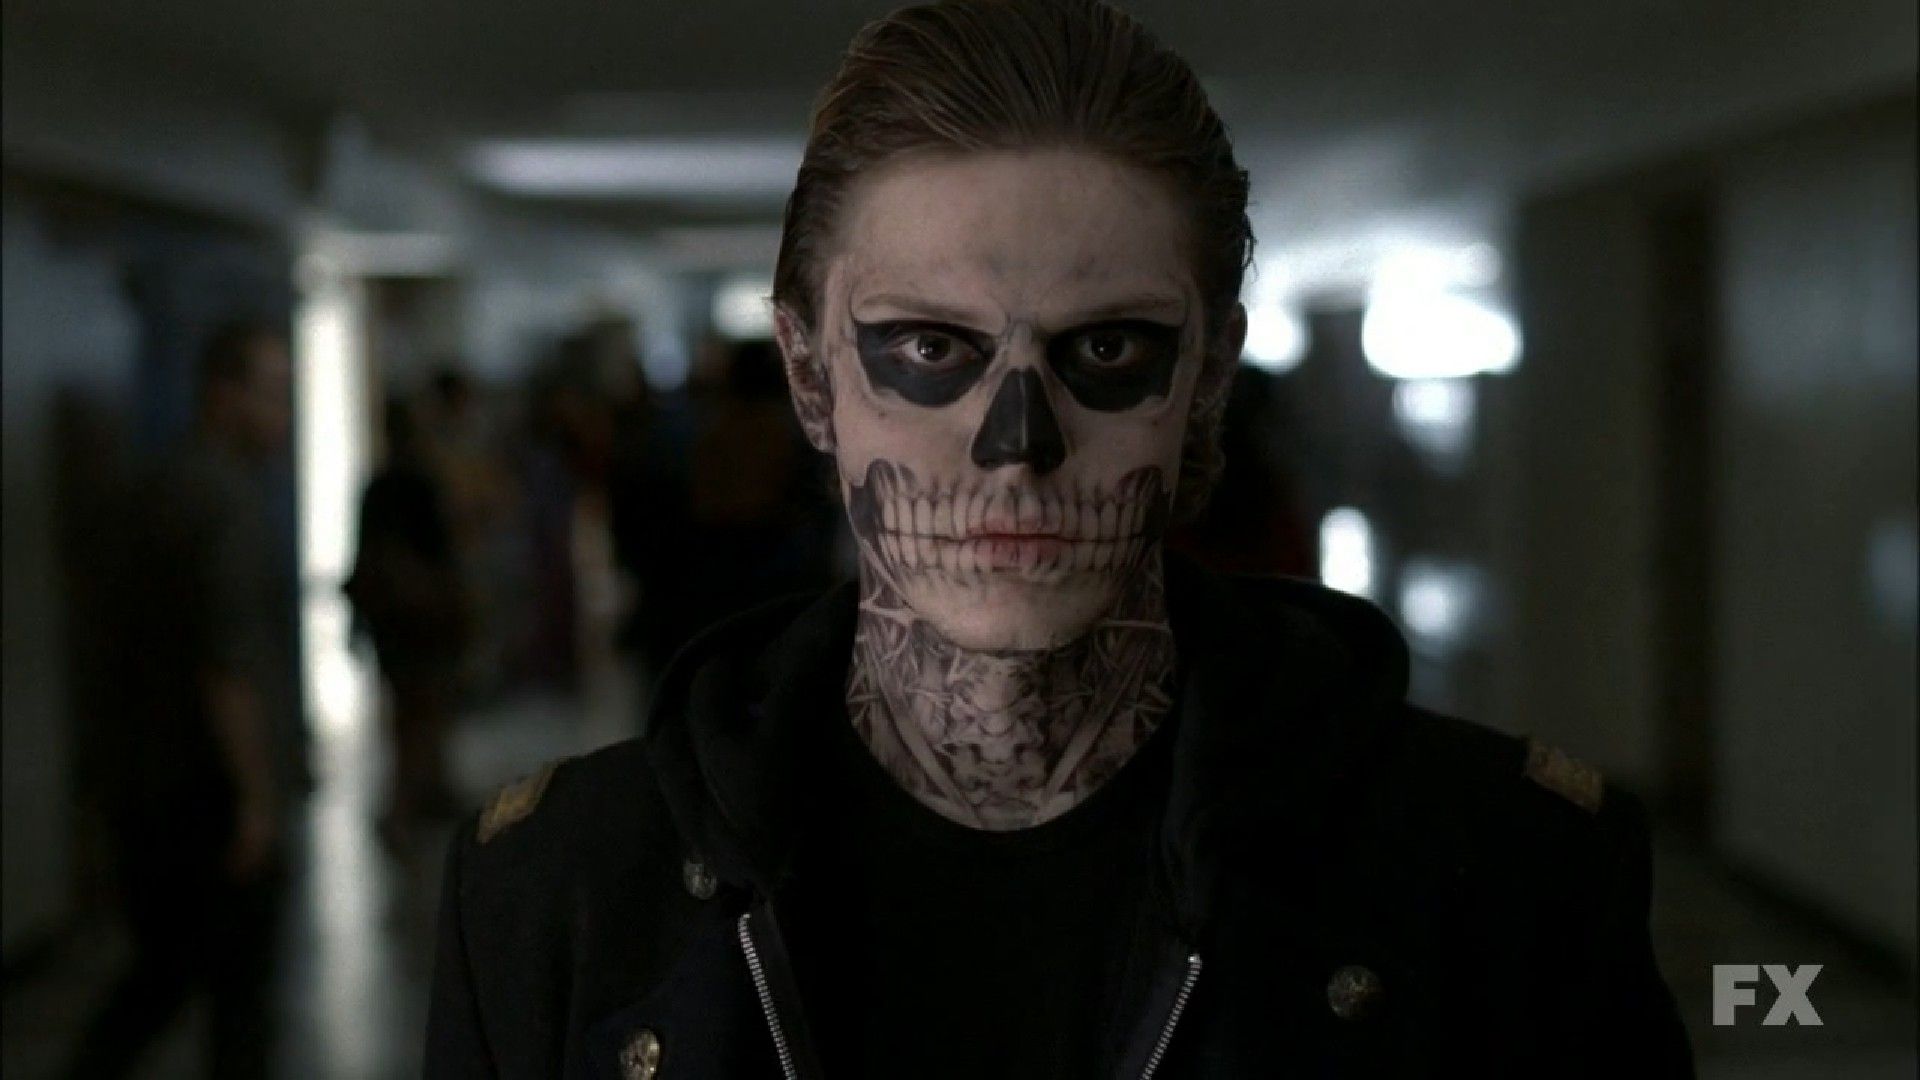 A man with black hair and white face paint - Evan Peters, horror